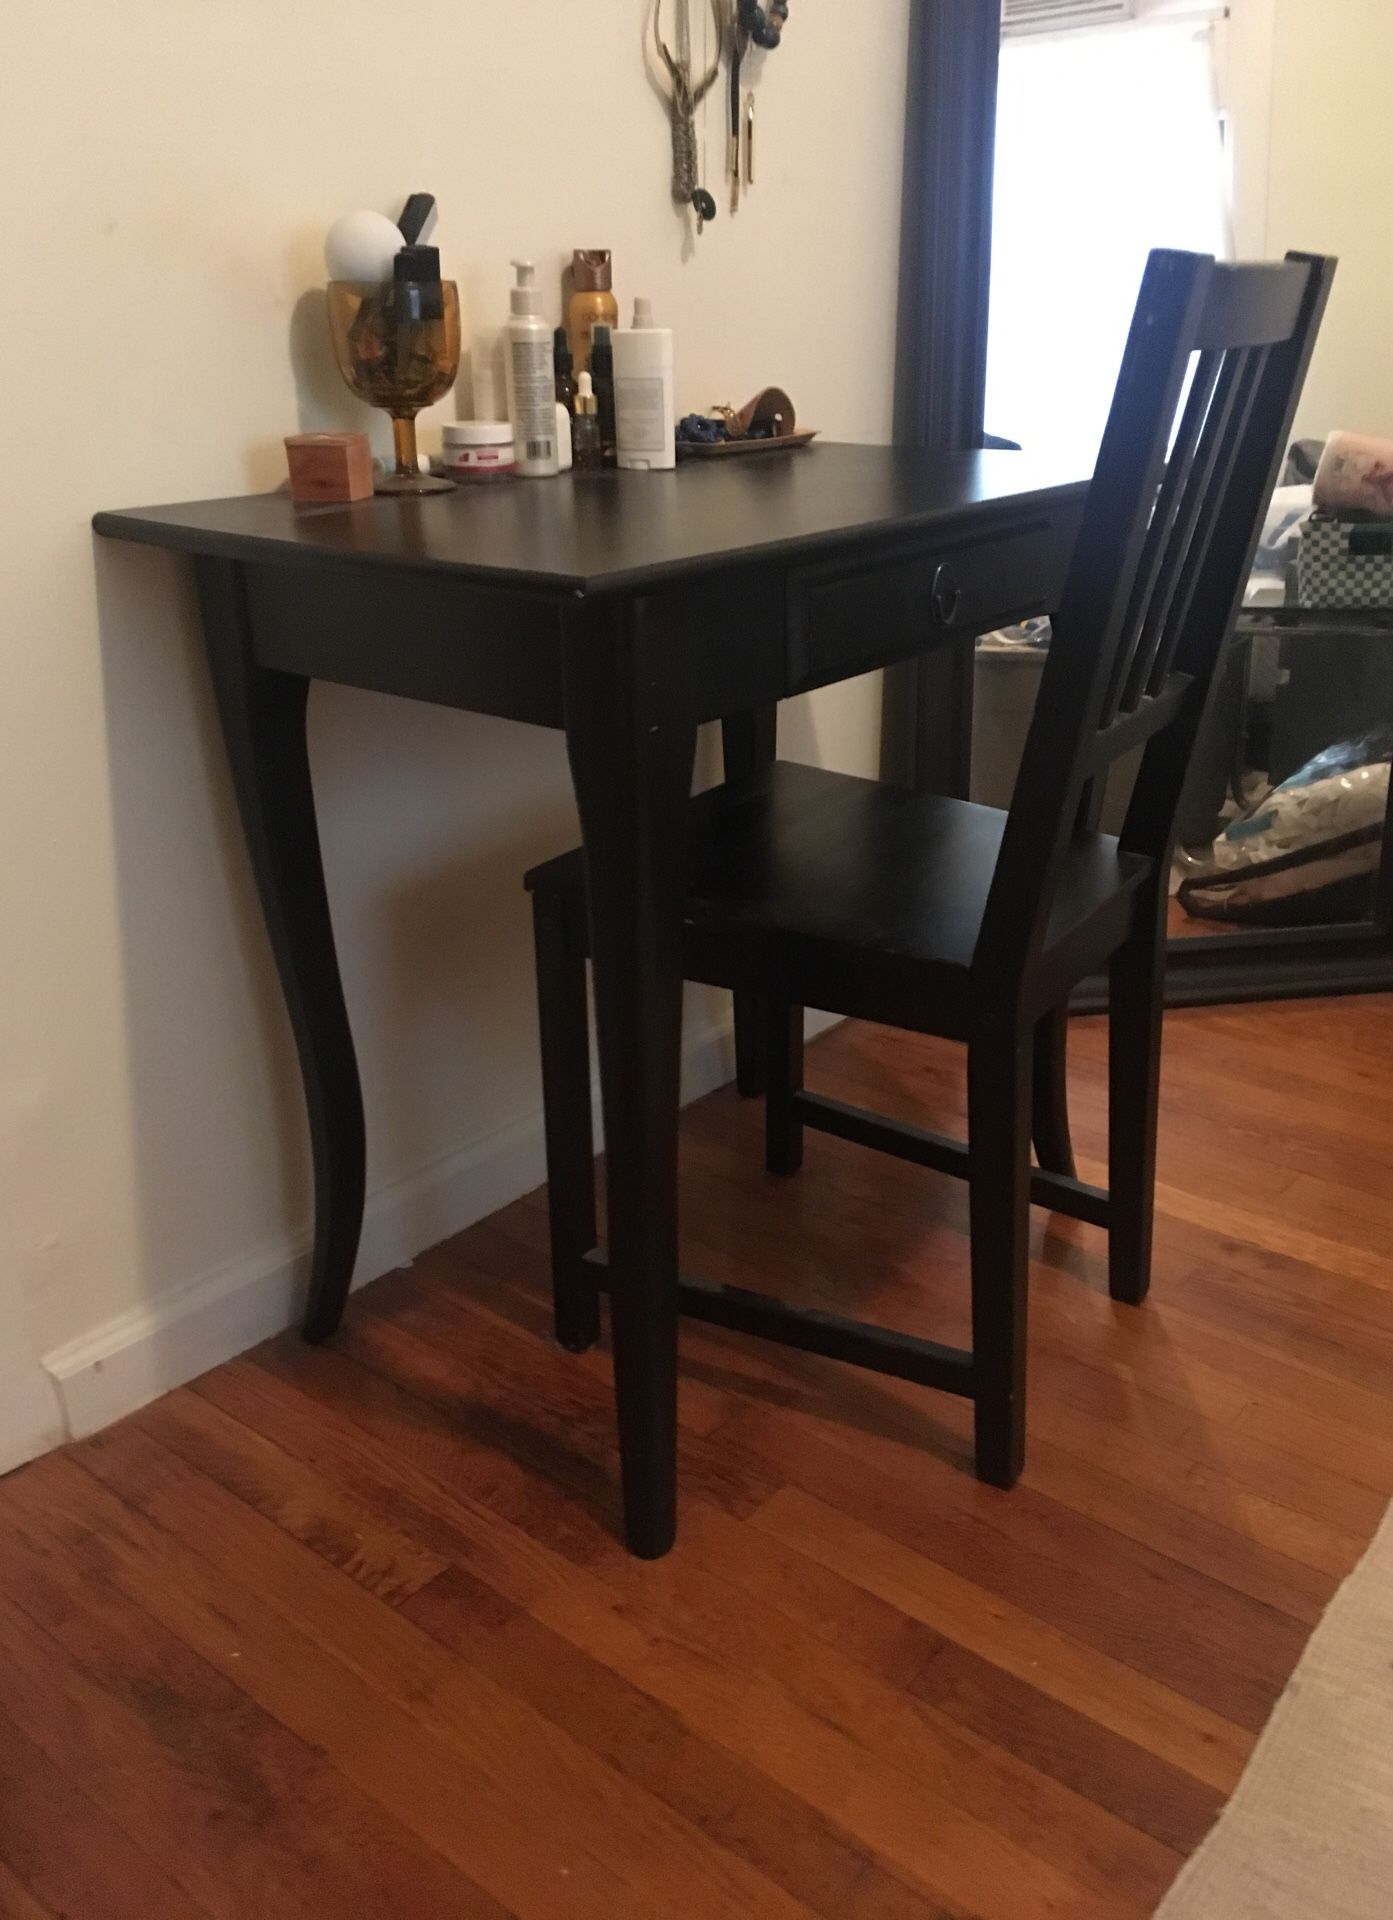 Vanity/small desk with chair